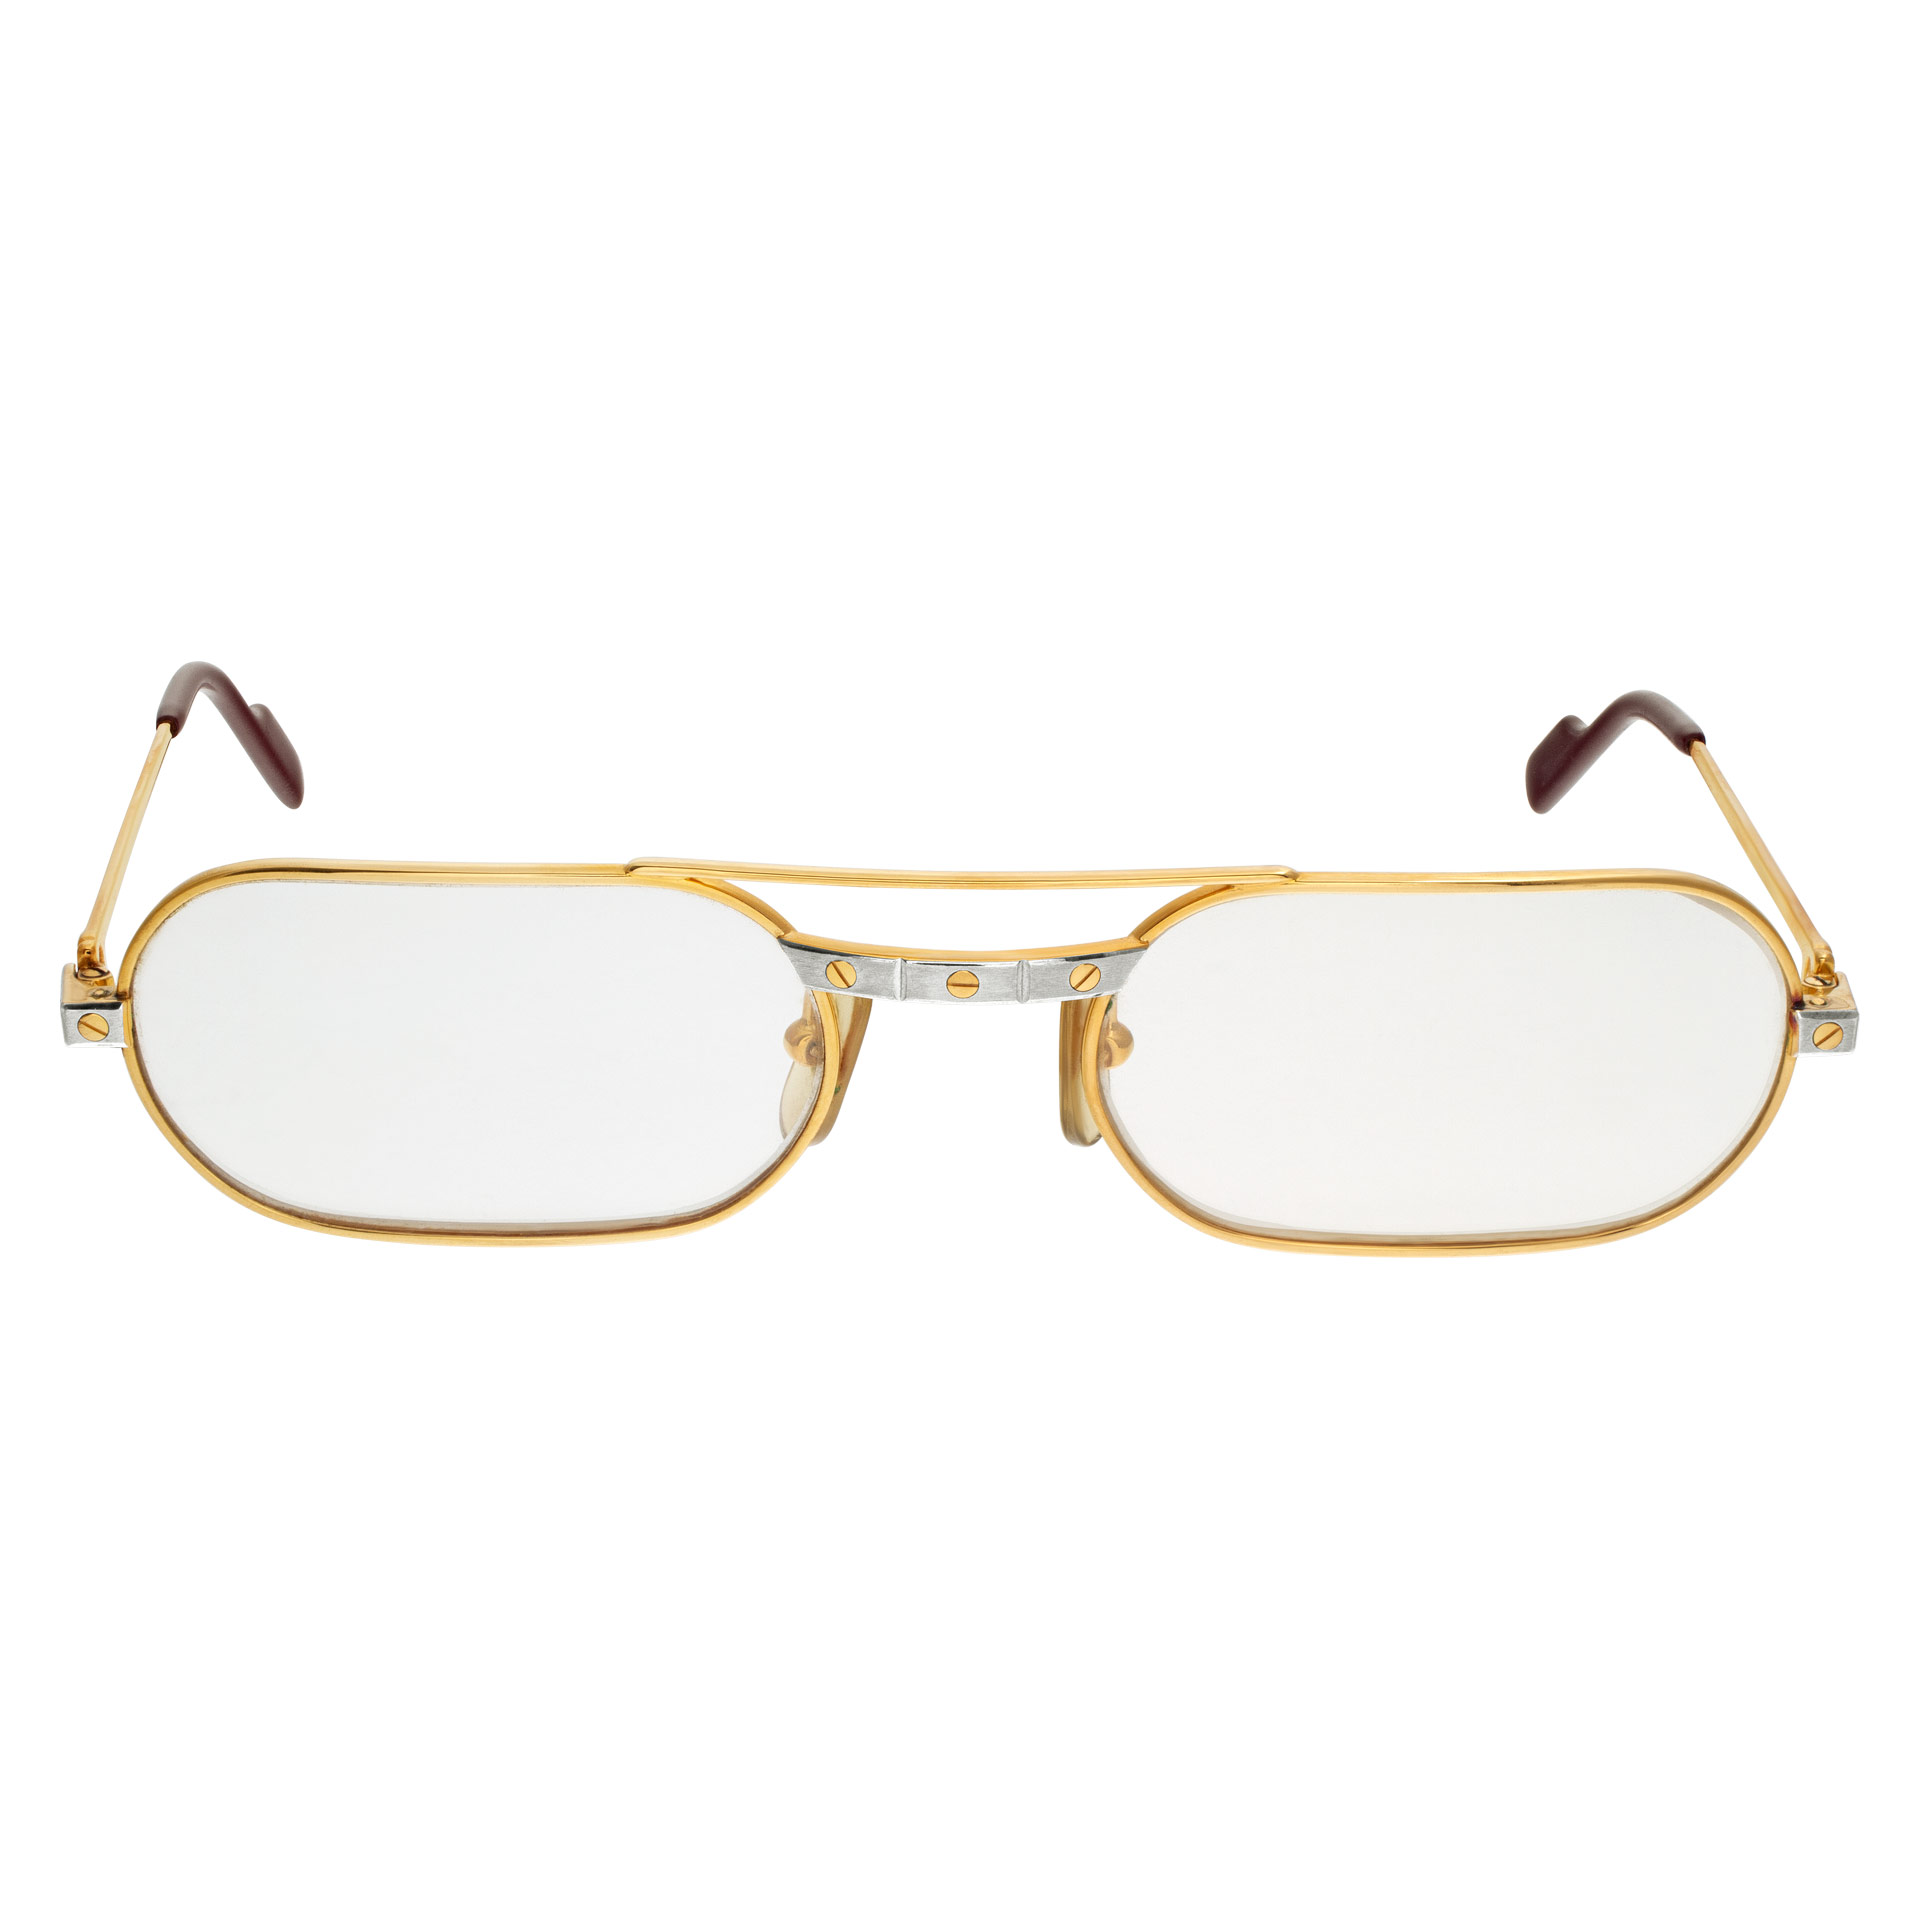 Cartier Santos glasses gold plated image 2